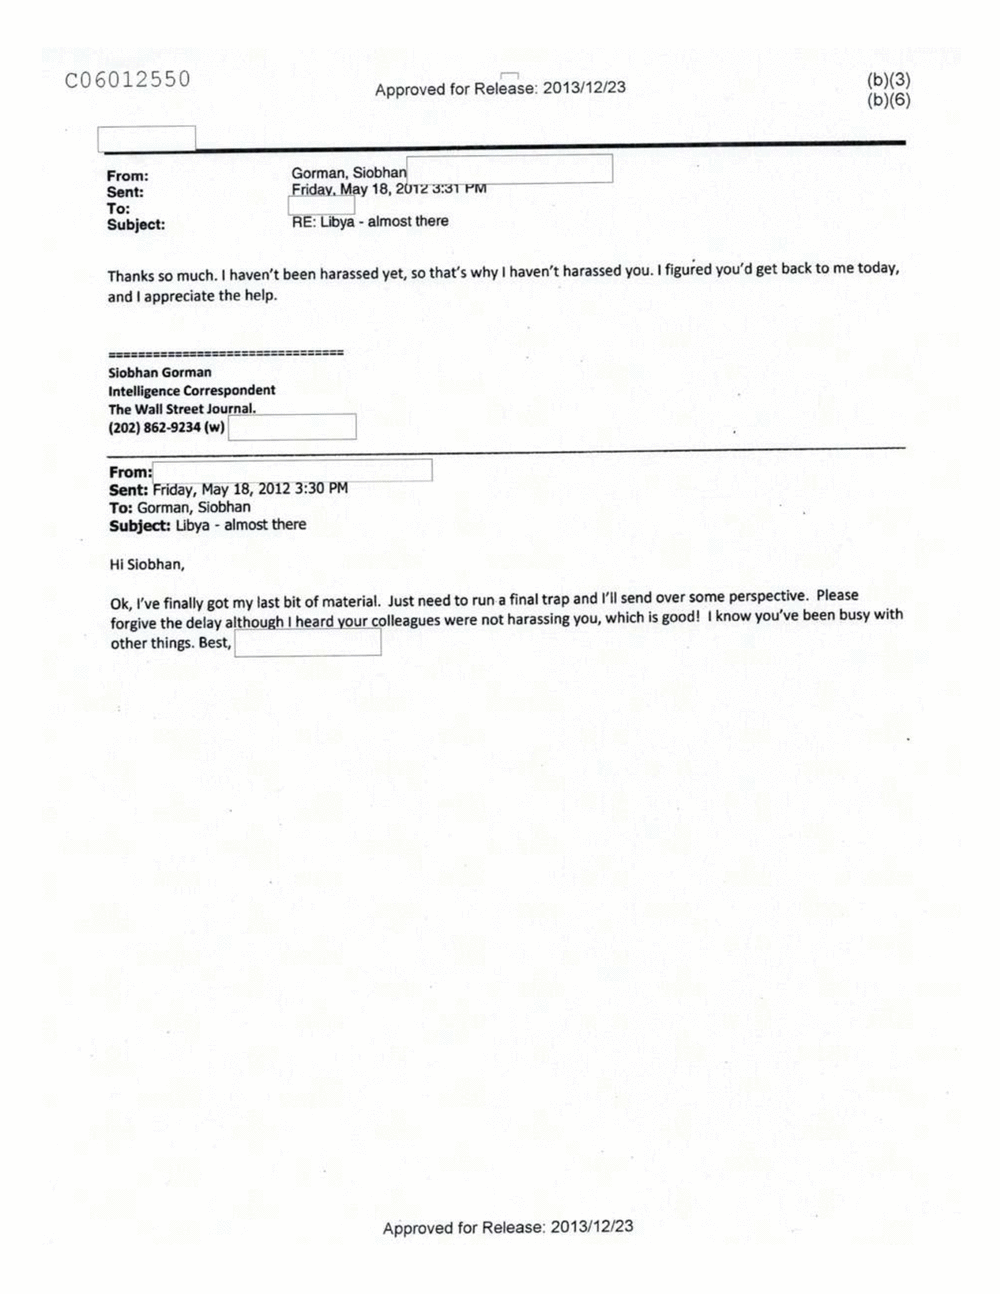 Page 86 from Email Correspondence Between Reporters and CIA Flacks